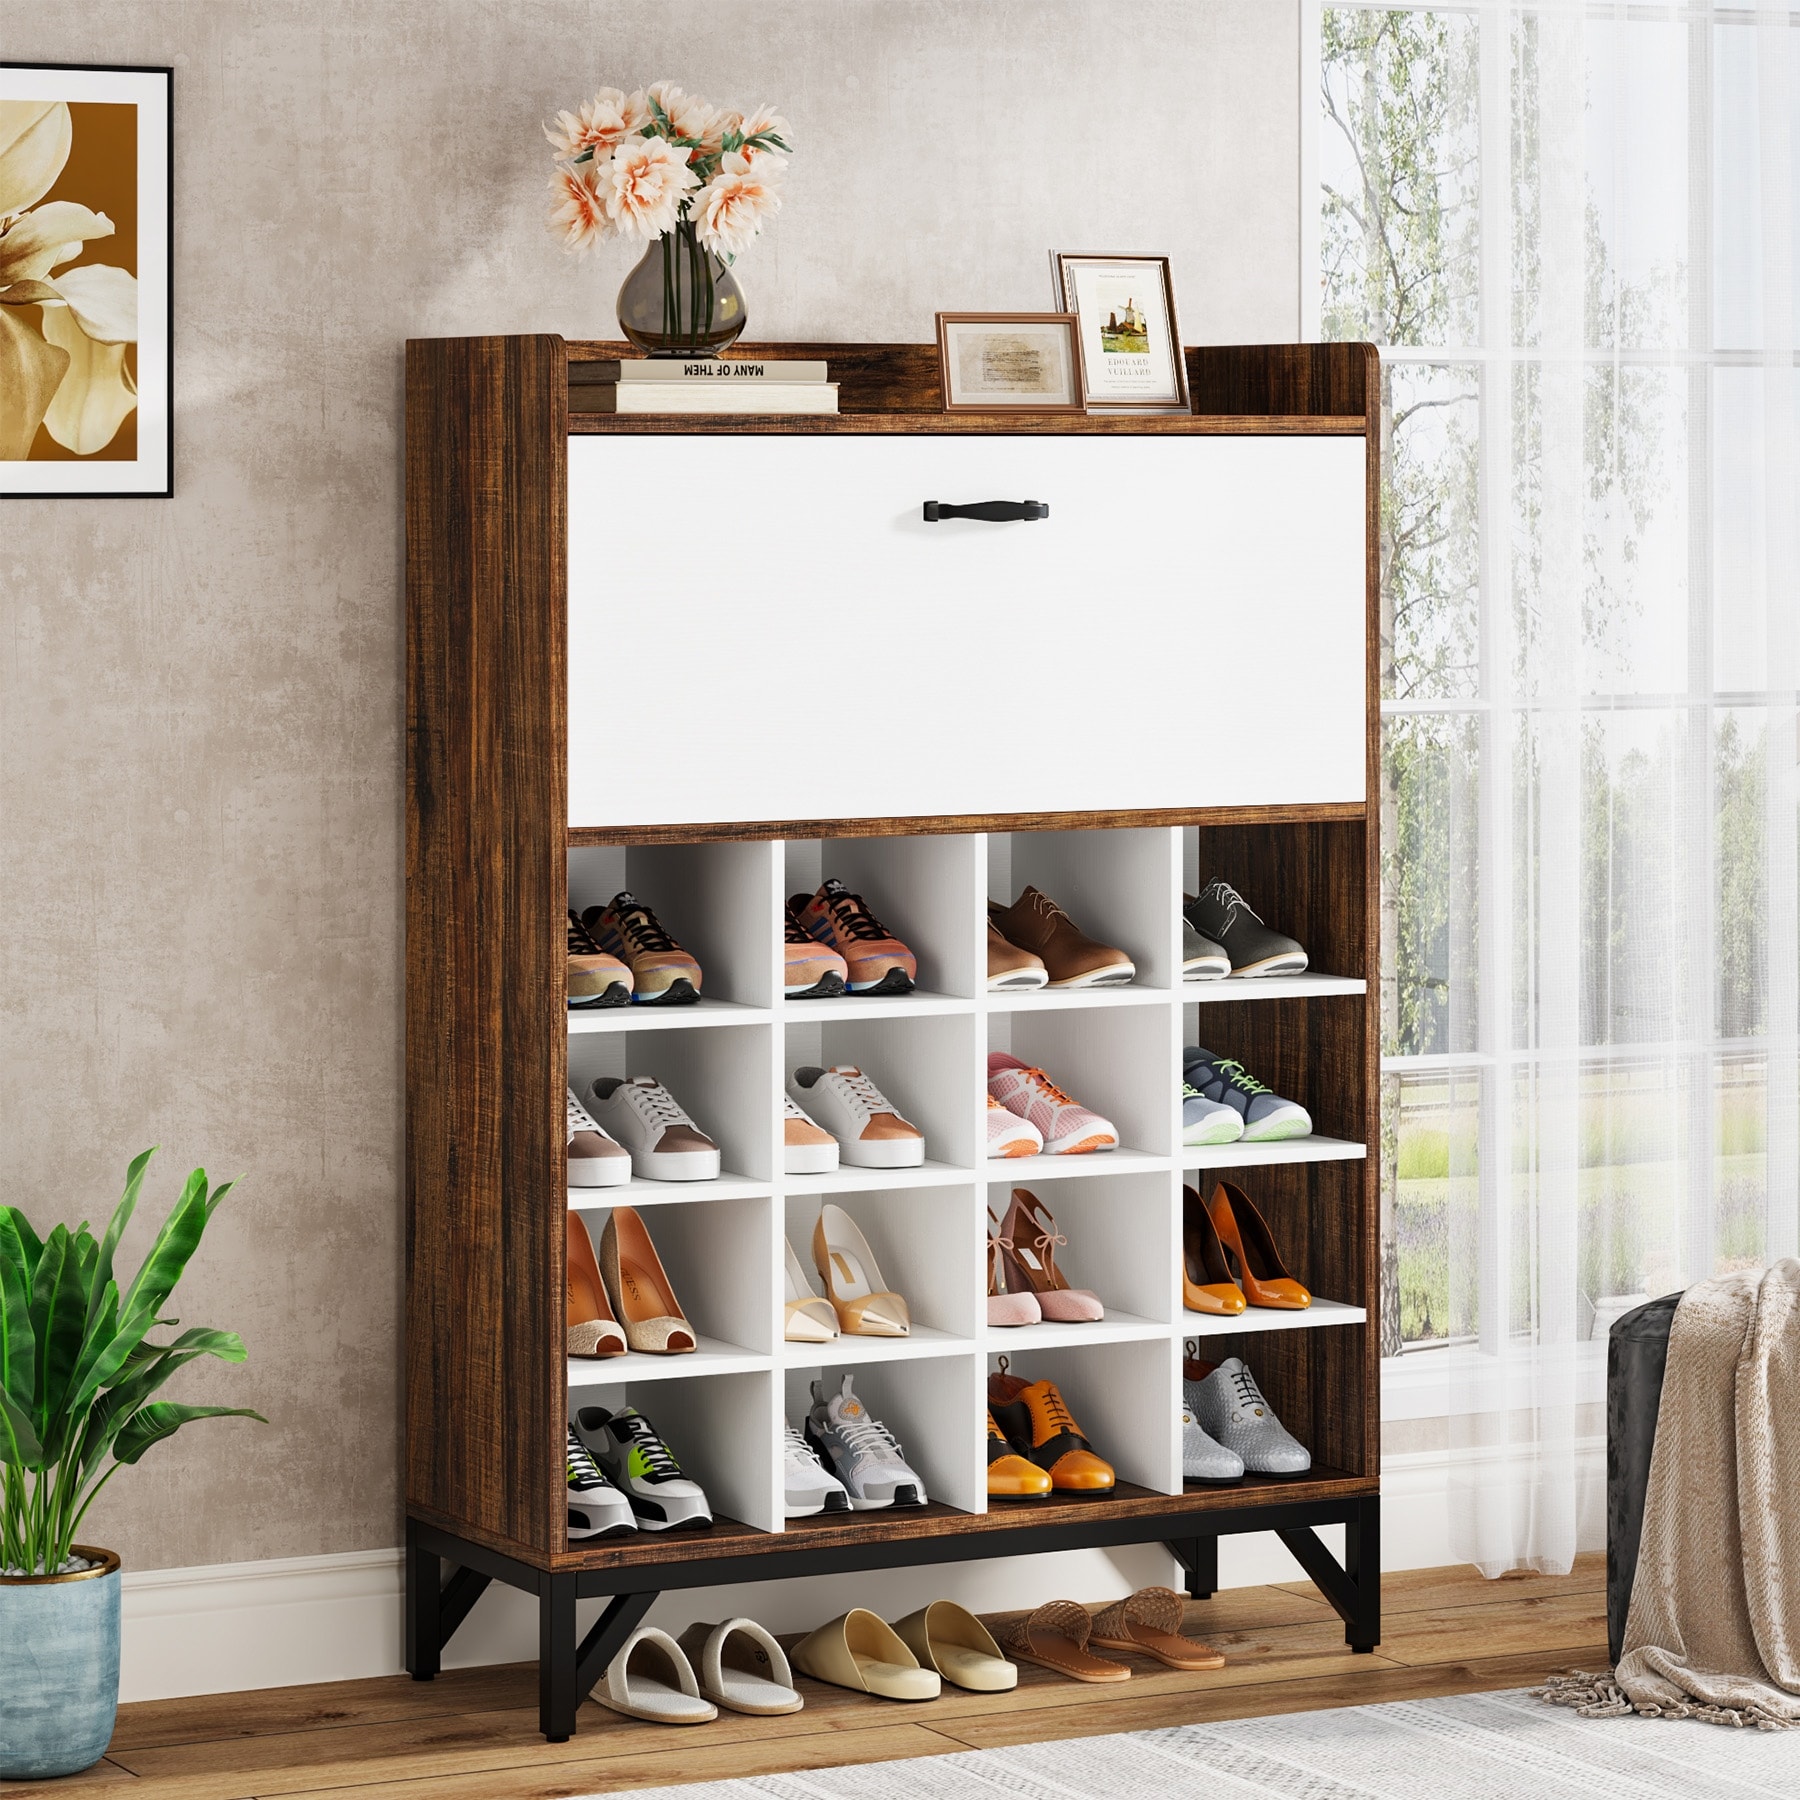 https://ak1.ostkcdn.com/images/products/is/images/direct/37c405c56522b0a493d6bd0b9bd937abea907707/24-Pairs-Shoe-Cabinet-Entryway-Shoe-Storage-Cabinet-Modern-Storage-Organizer.jpg